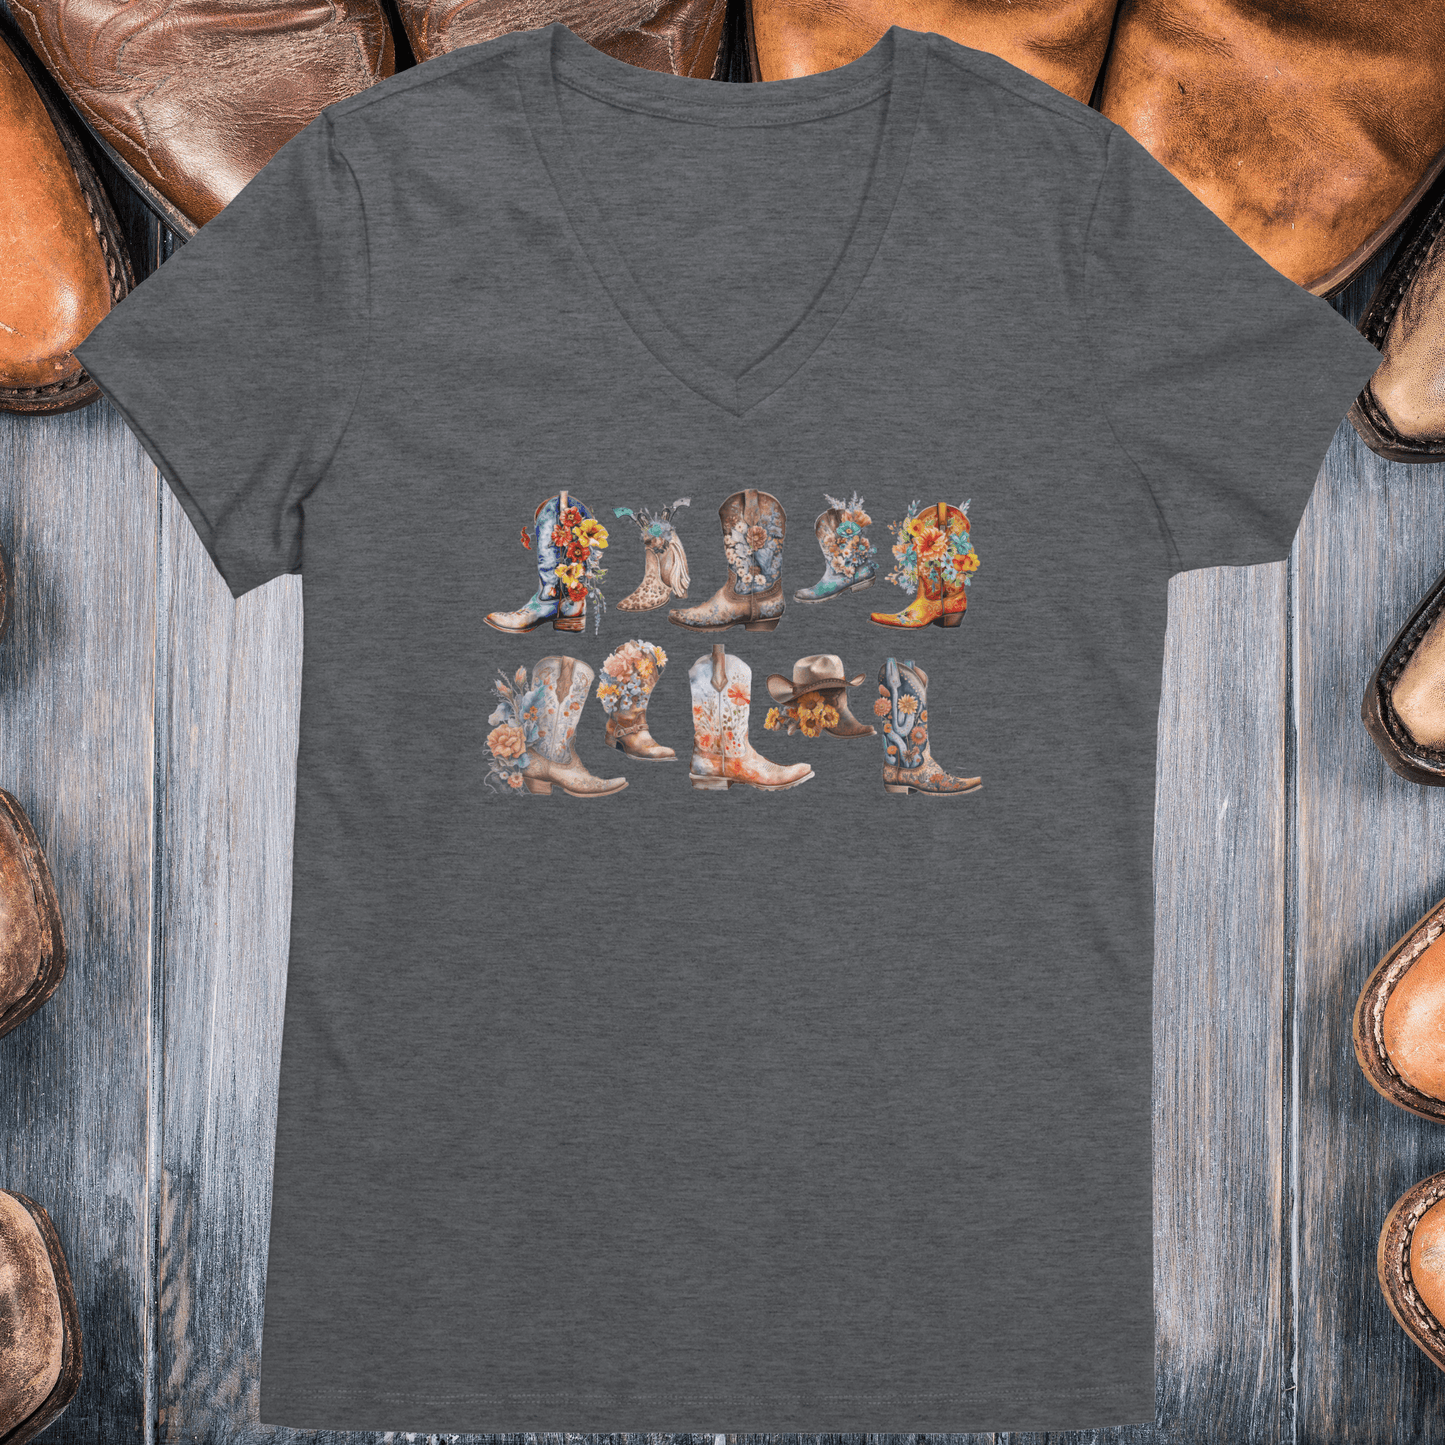 Cowgirl Boots Shirt, Texas -Inspired Western Graphic Tee For Women, Oversized Graphic Tee, Cute Country Shirts, Cowgirl Flower Shirt, Country Concert Tee